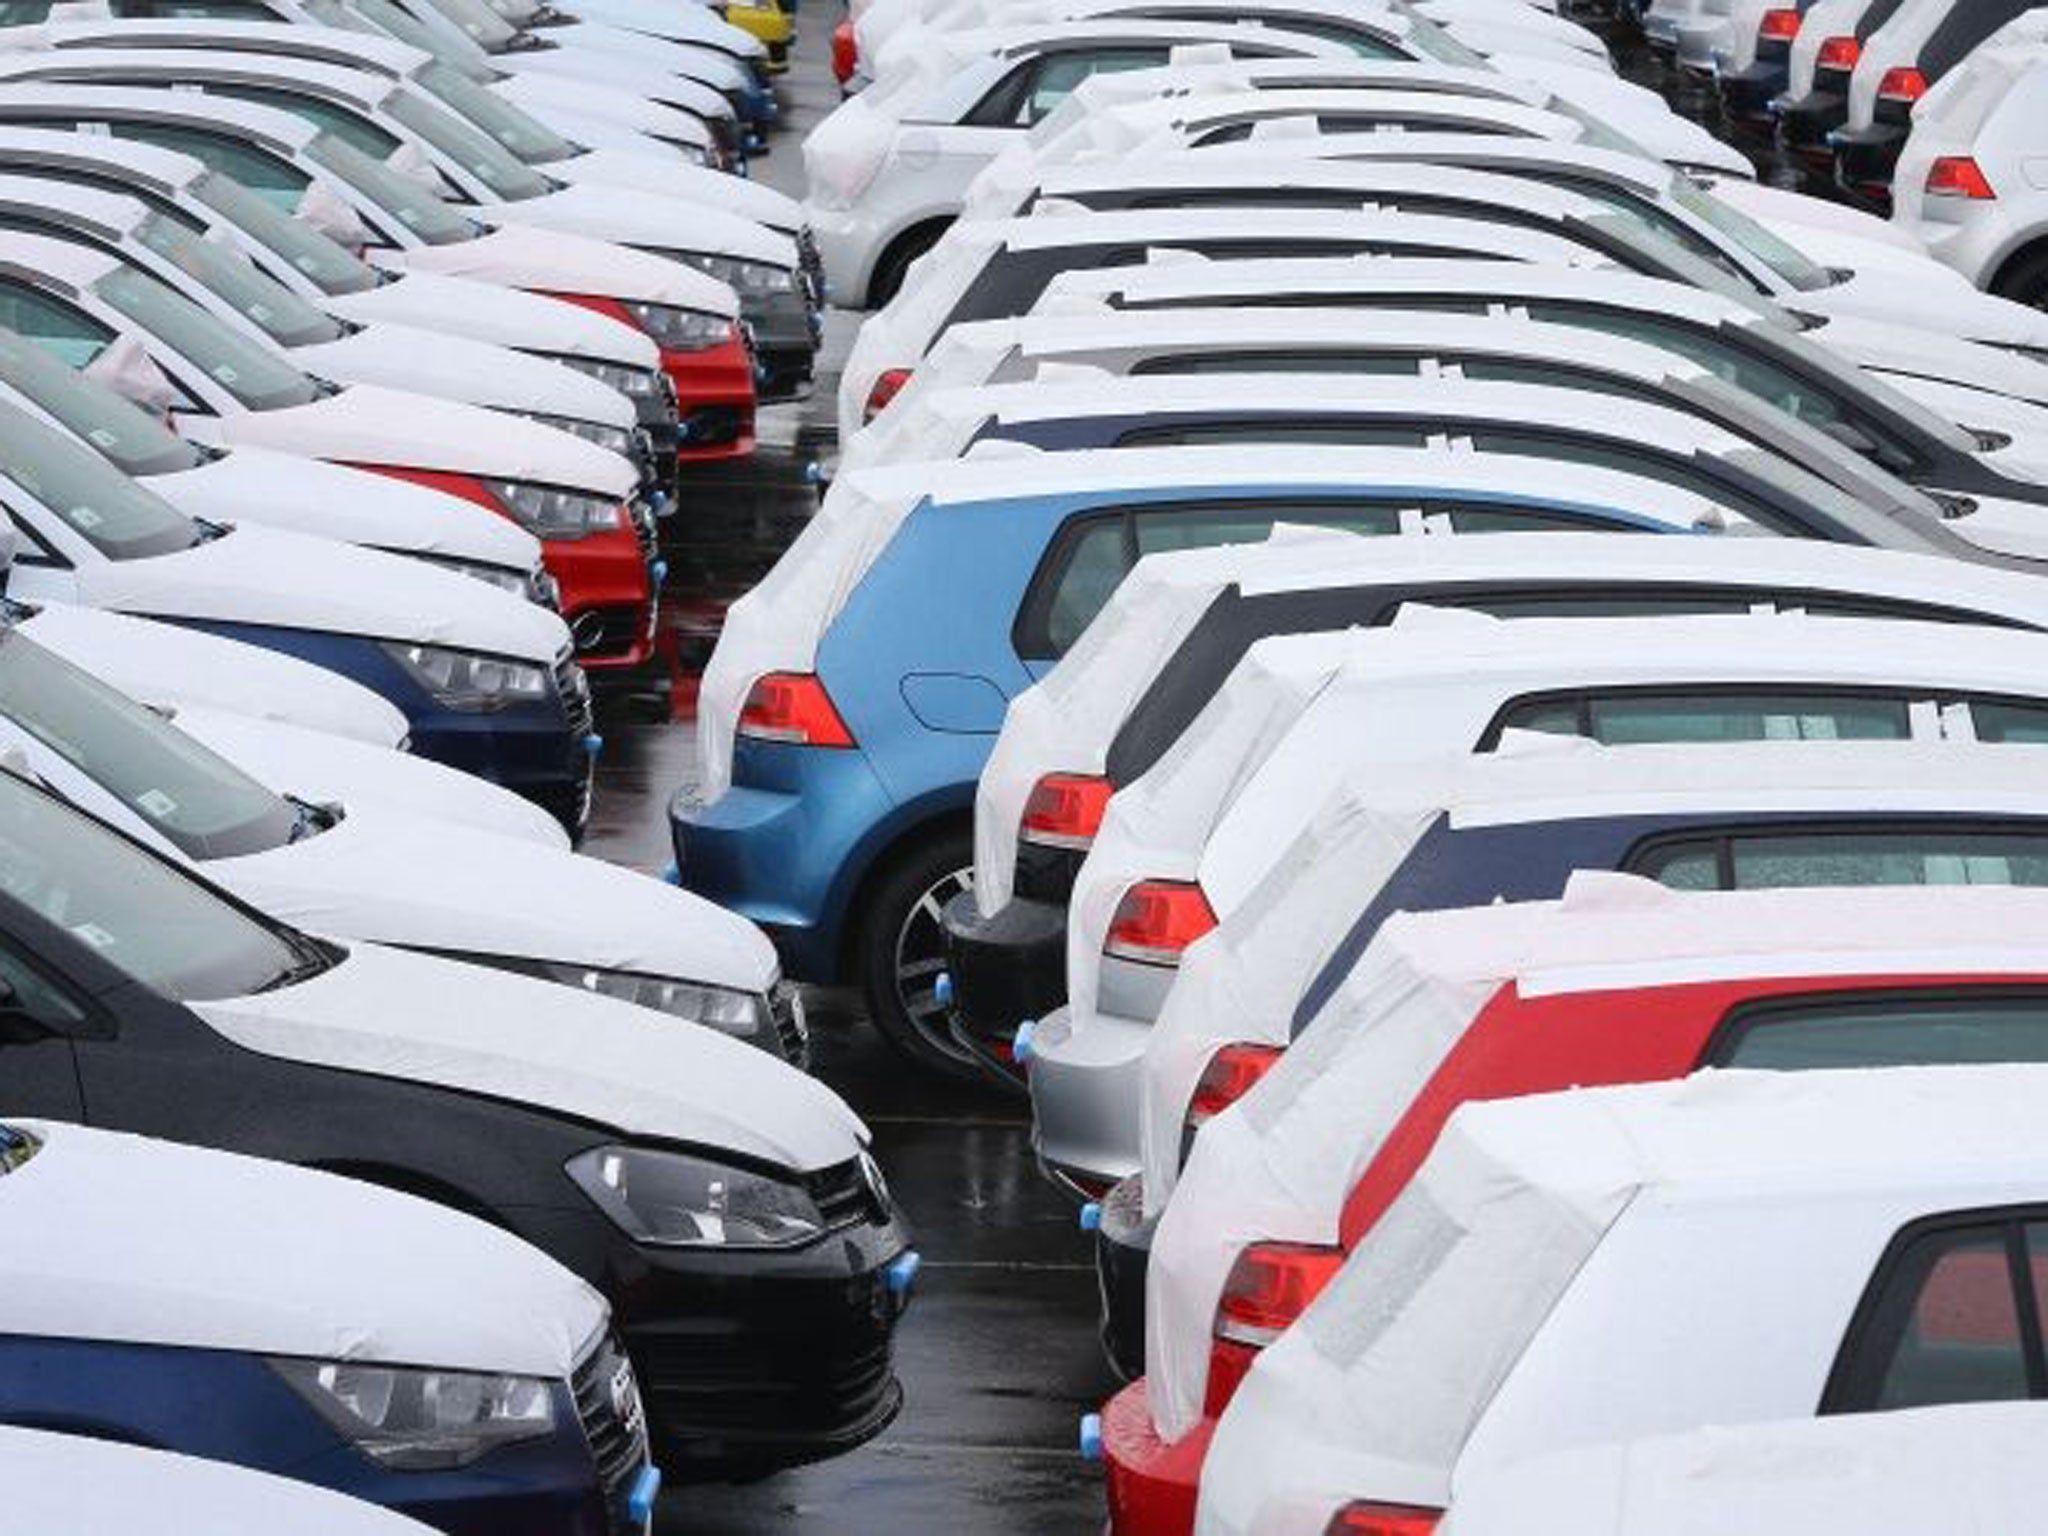 Car sales in 2014 were the fourth highest on record, at nearly 2.5 million